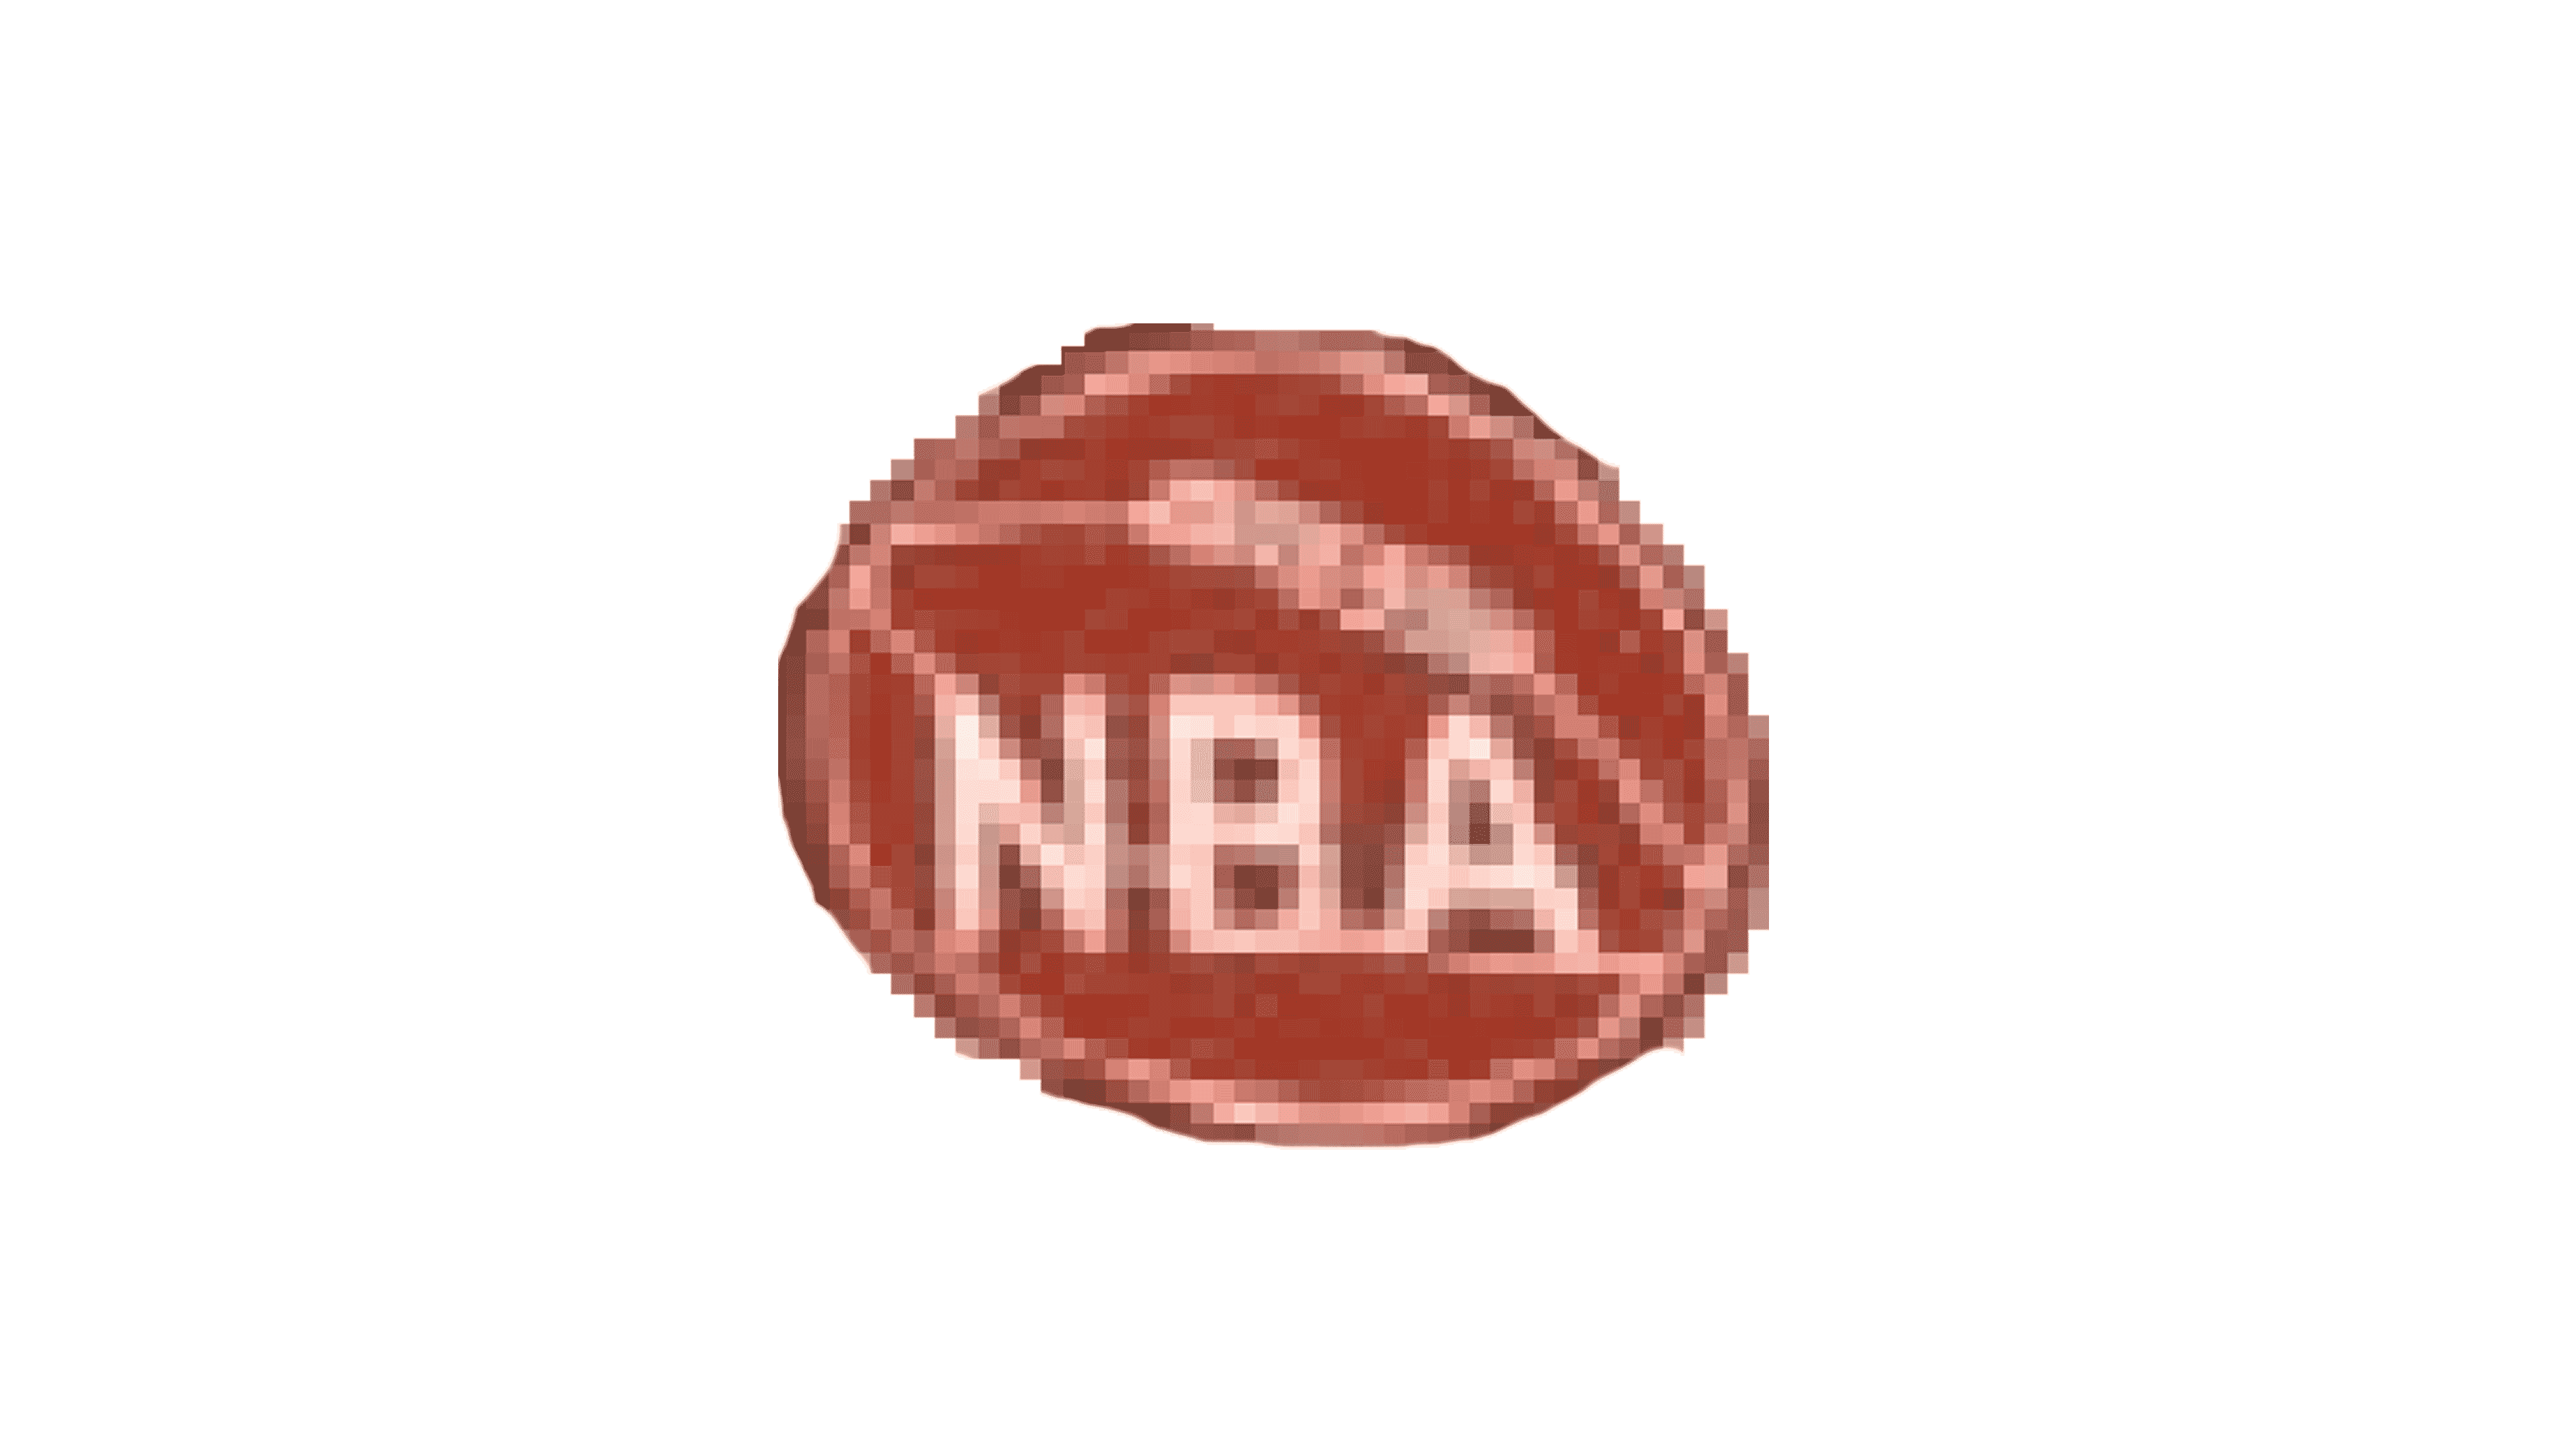 Women's National Basketball Association Logo and symbol, meaning